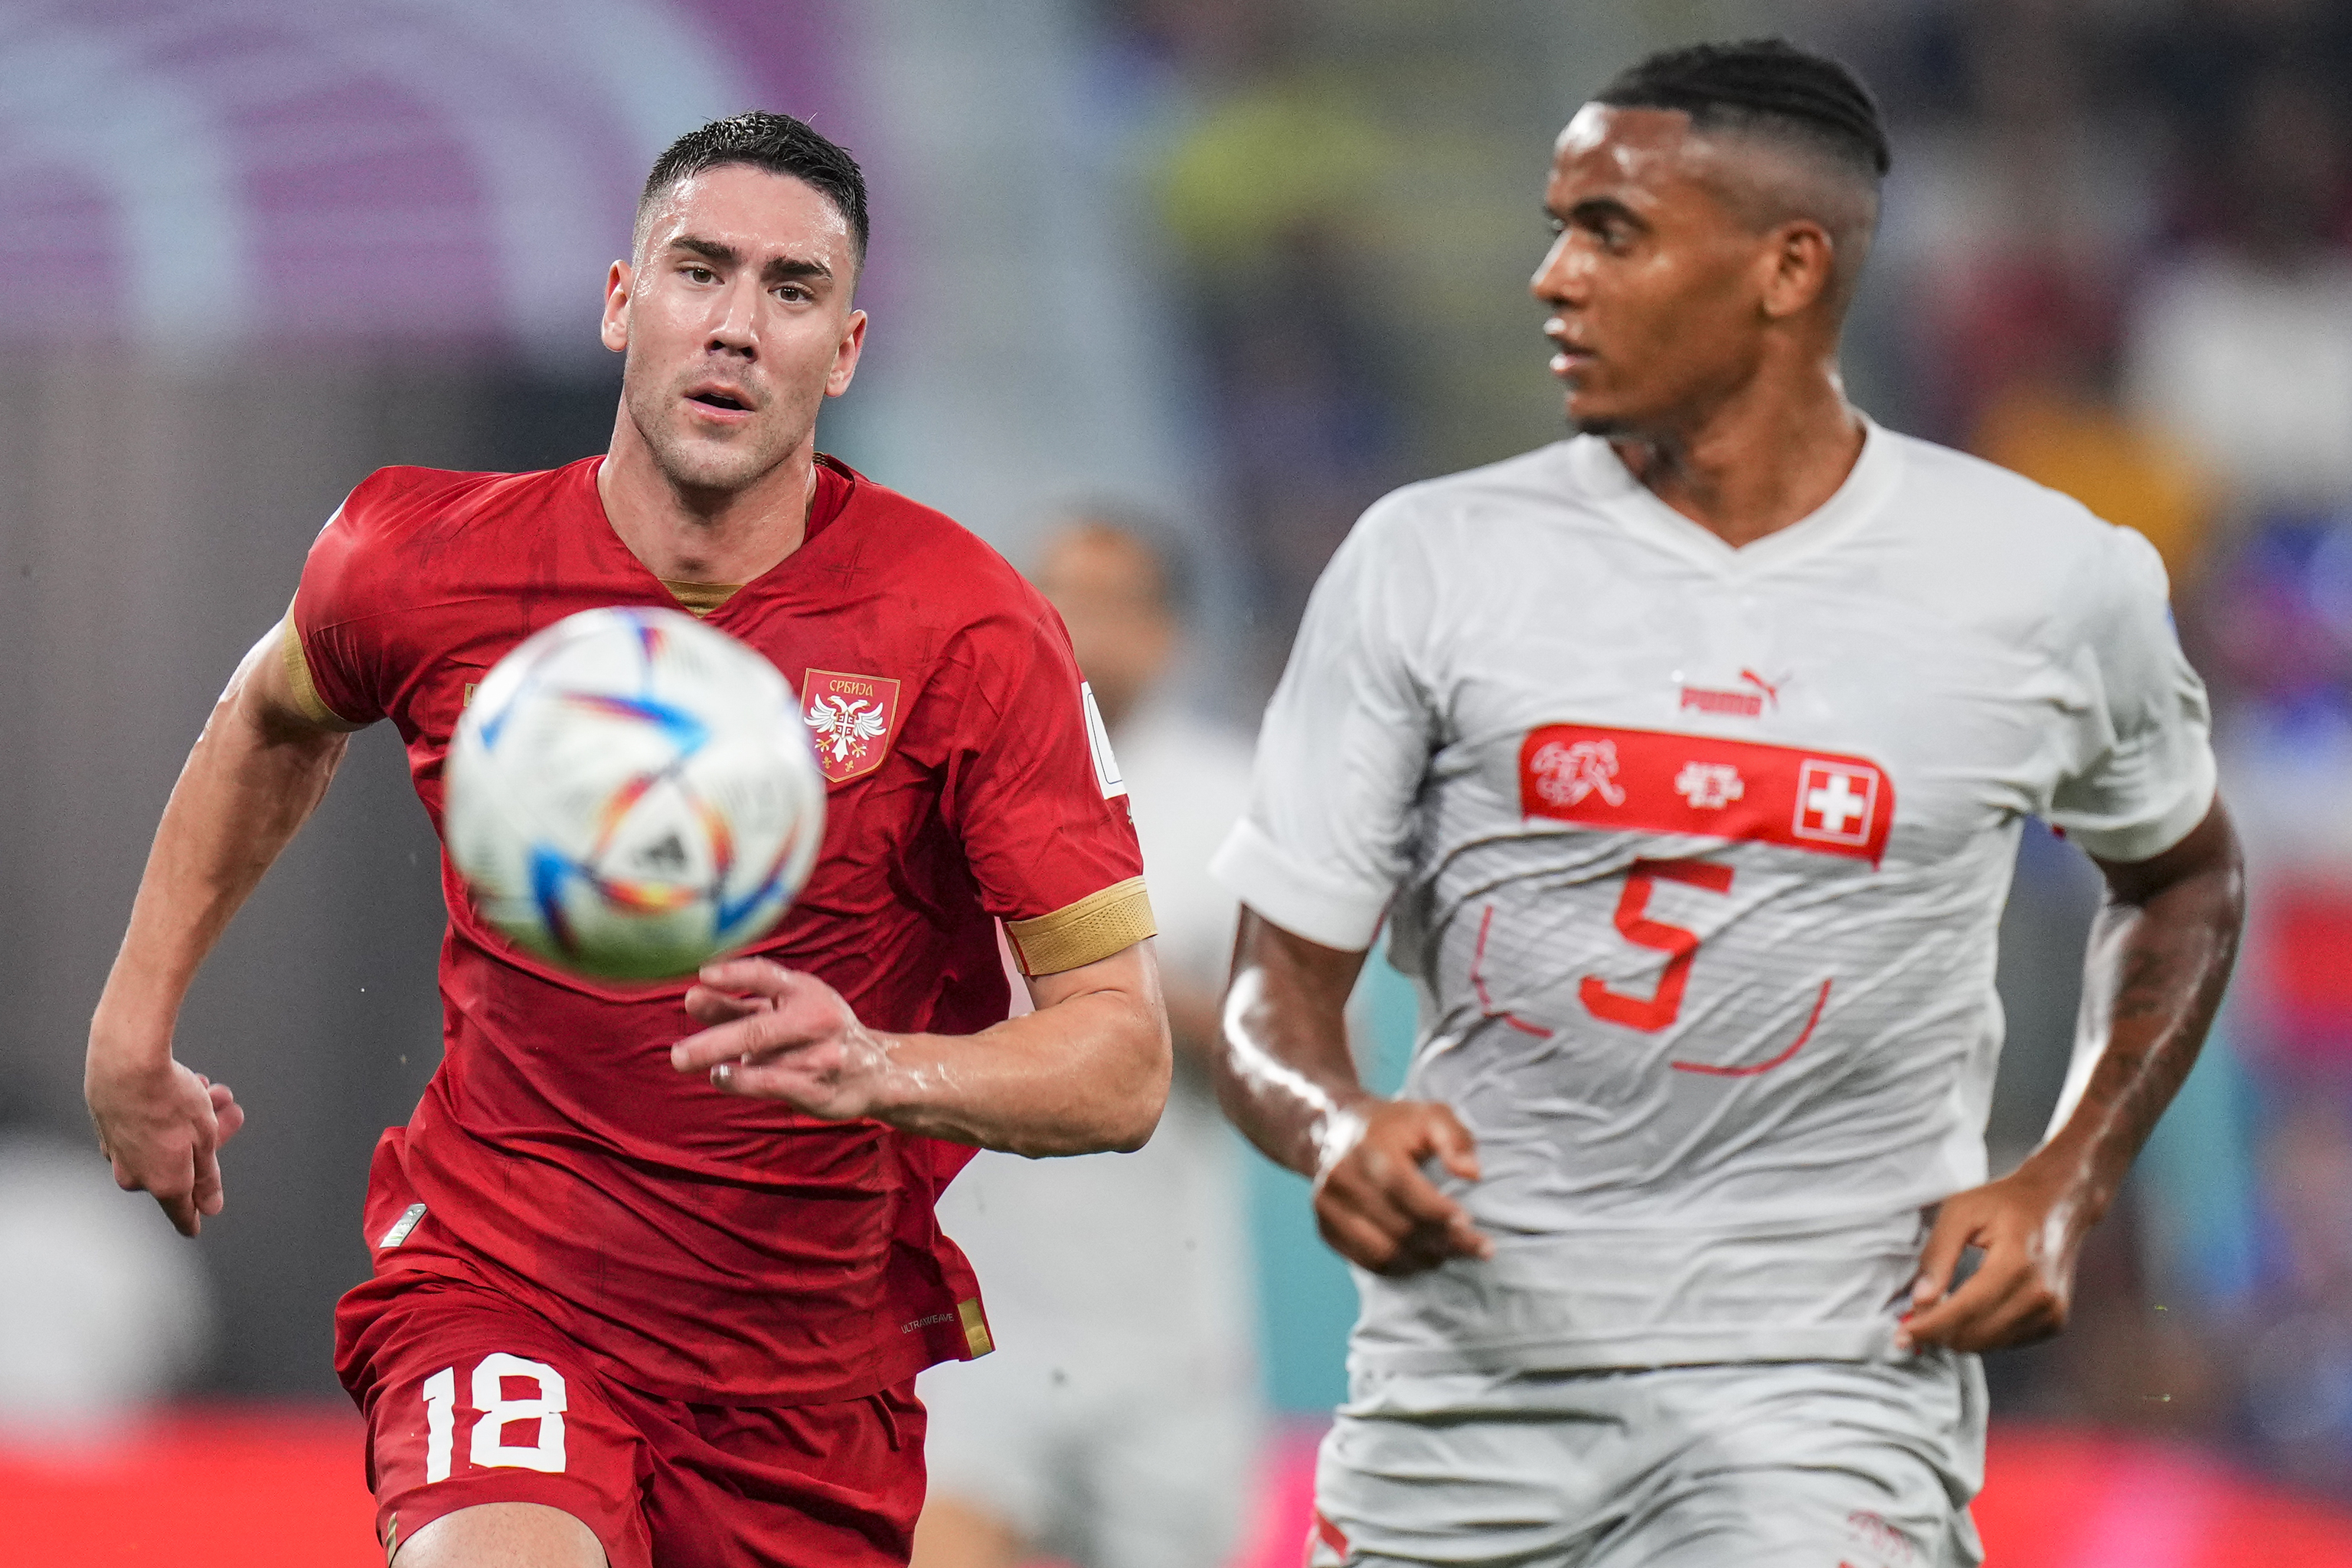 Serbia's Dusan Vlahovic, left, vies for the ball with  lt;HIT gt;Switzerland lt;/HIT gt;'s Manuel Akanji during the World Cup group G soccer match between Serbia and  lt;HIT gt;Switzerland lt;/HIT gt;, at the Stadium 974 in Doha, Qatar, Friday, Dec. 2, 2022. (AP Photo/Petr David Josek)